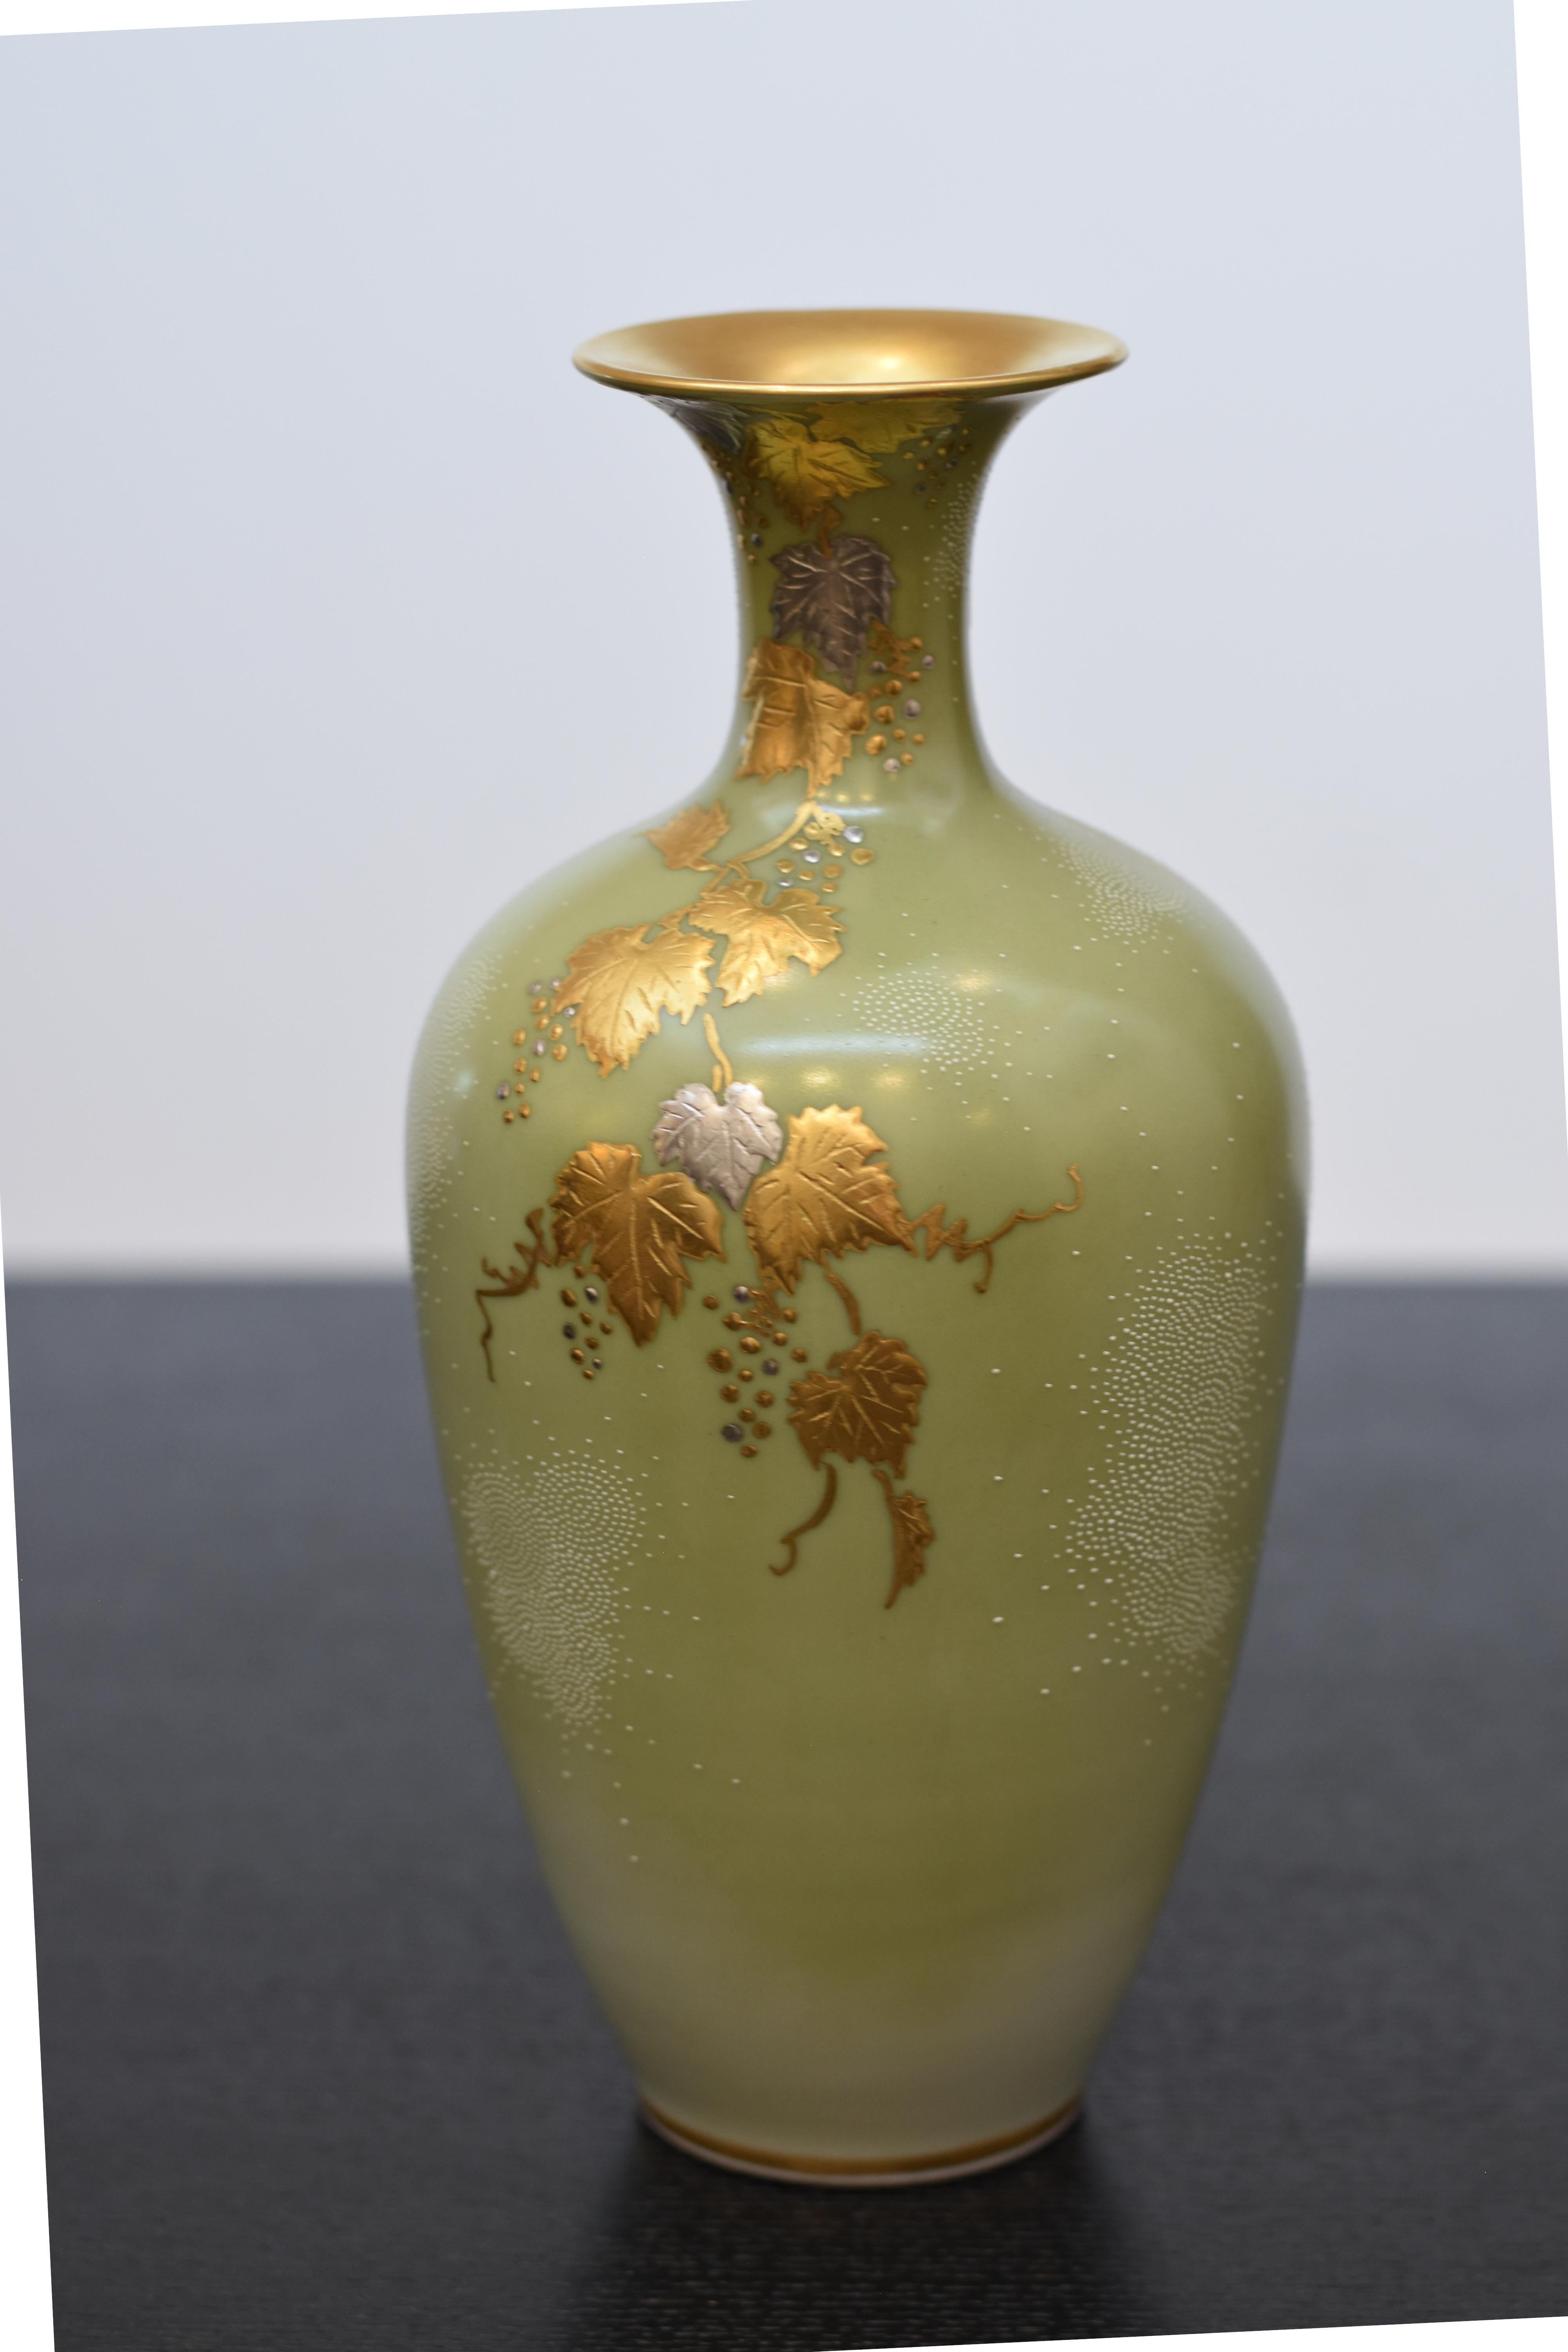 Exceptional museum quality signed Japanese contemporary porcelain vase, a masterpiece by a celebrated award-winning third-generation porcelain artist of the Kutani region of Japan featuring a cascade of grape vines rendered in pure gold and platinum